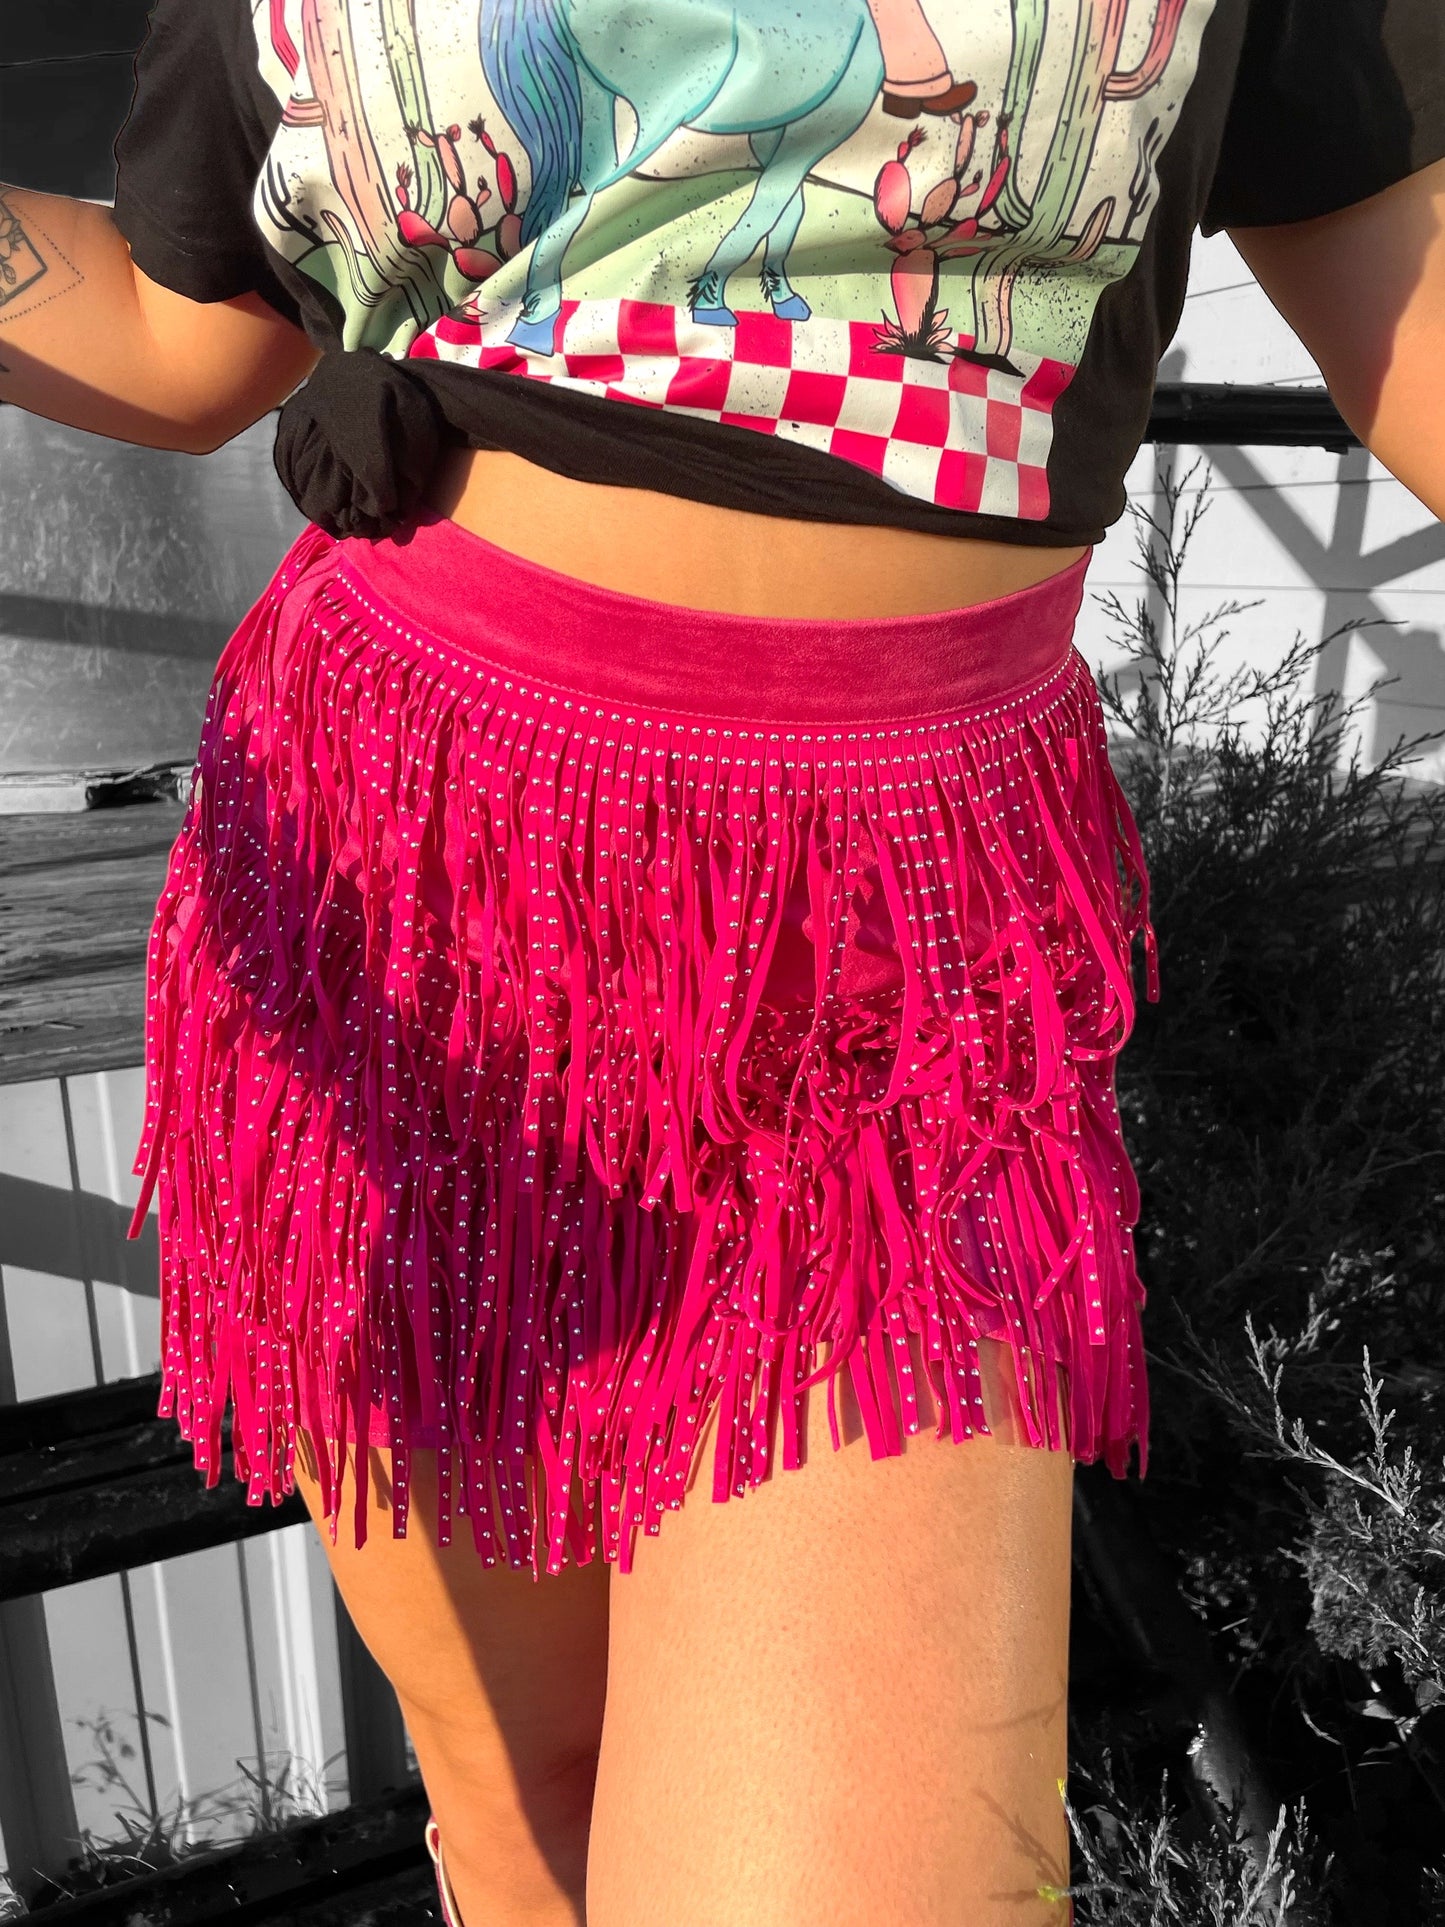 The “Pink Penelope” Skirt